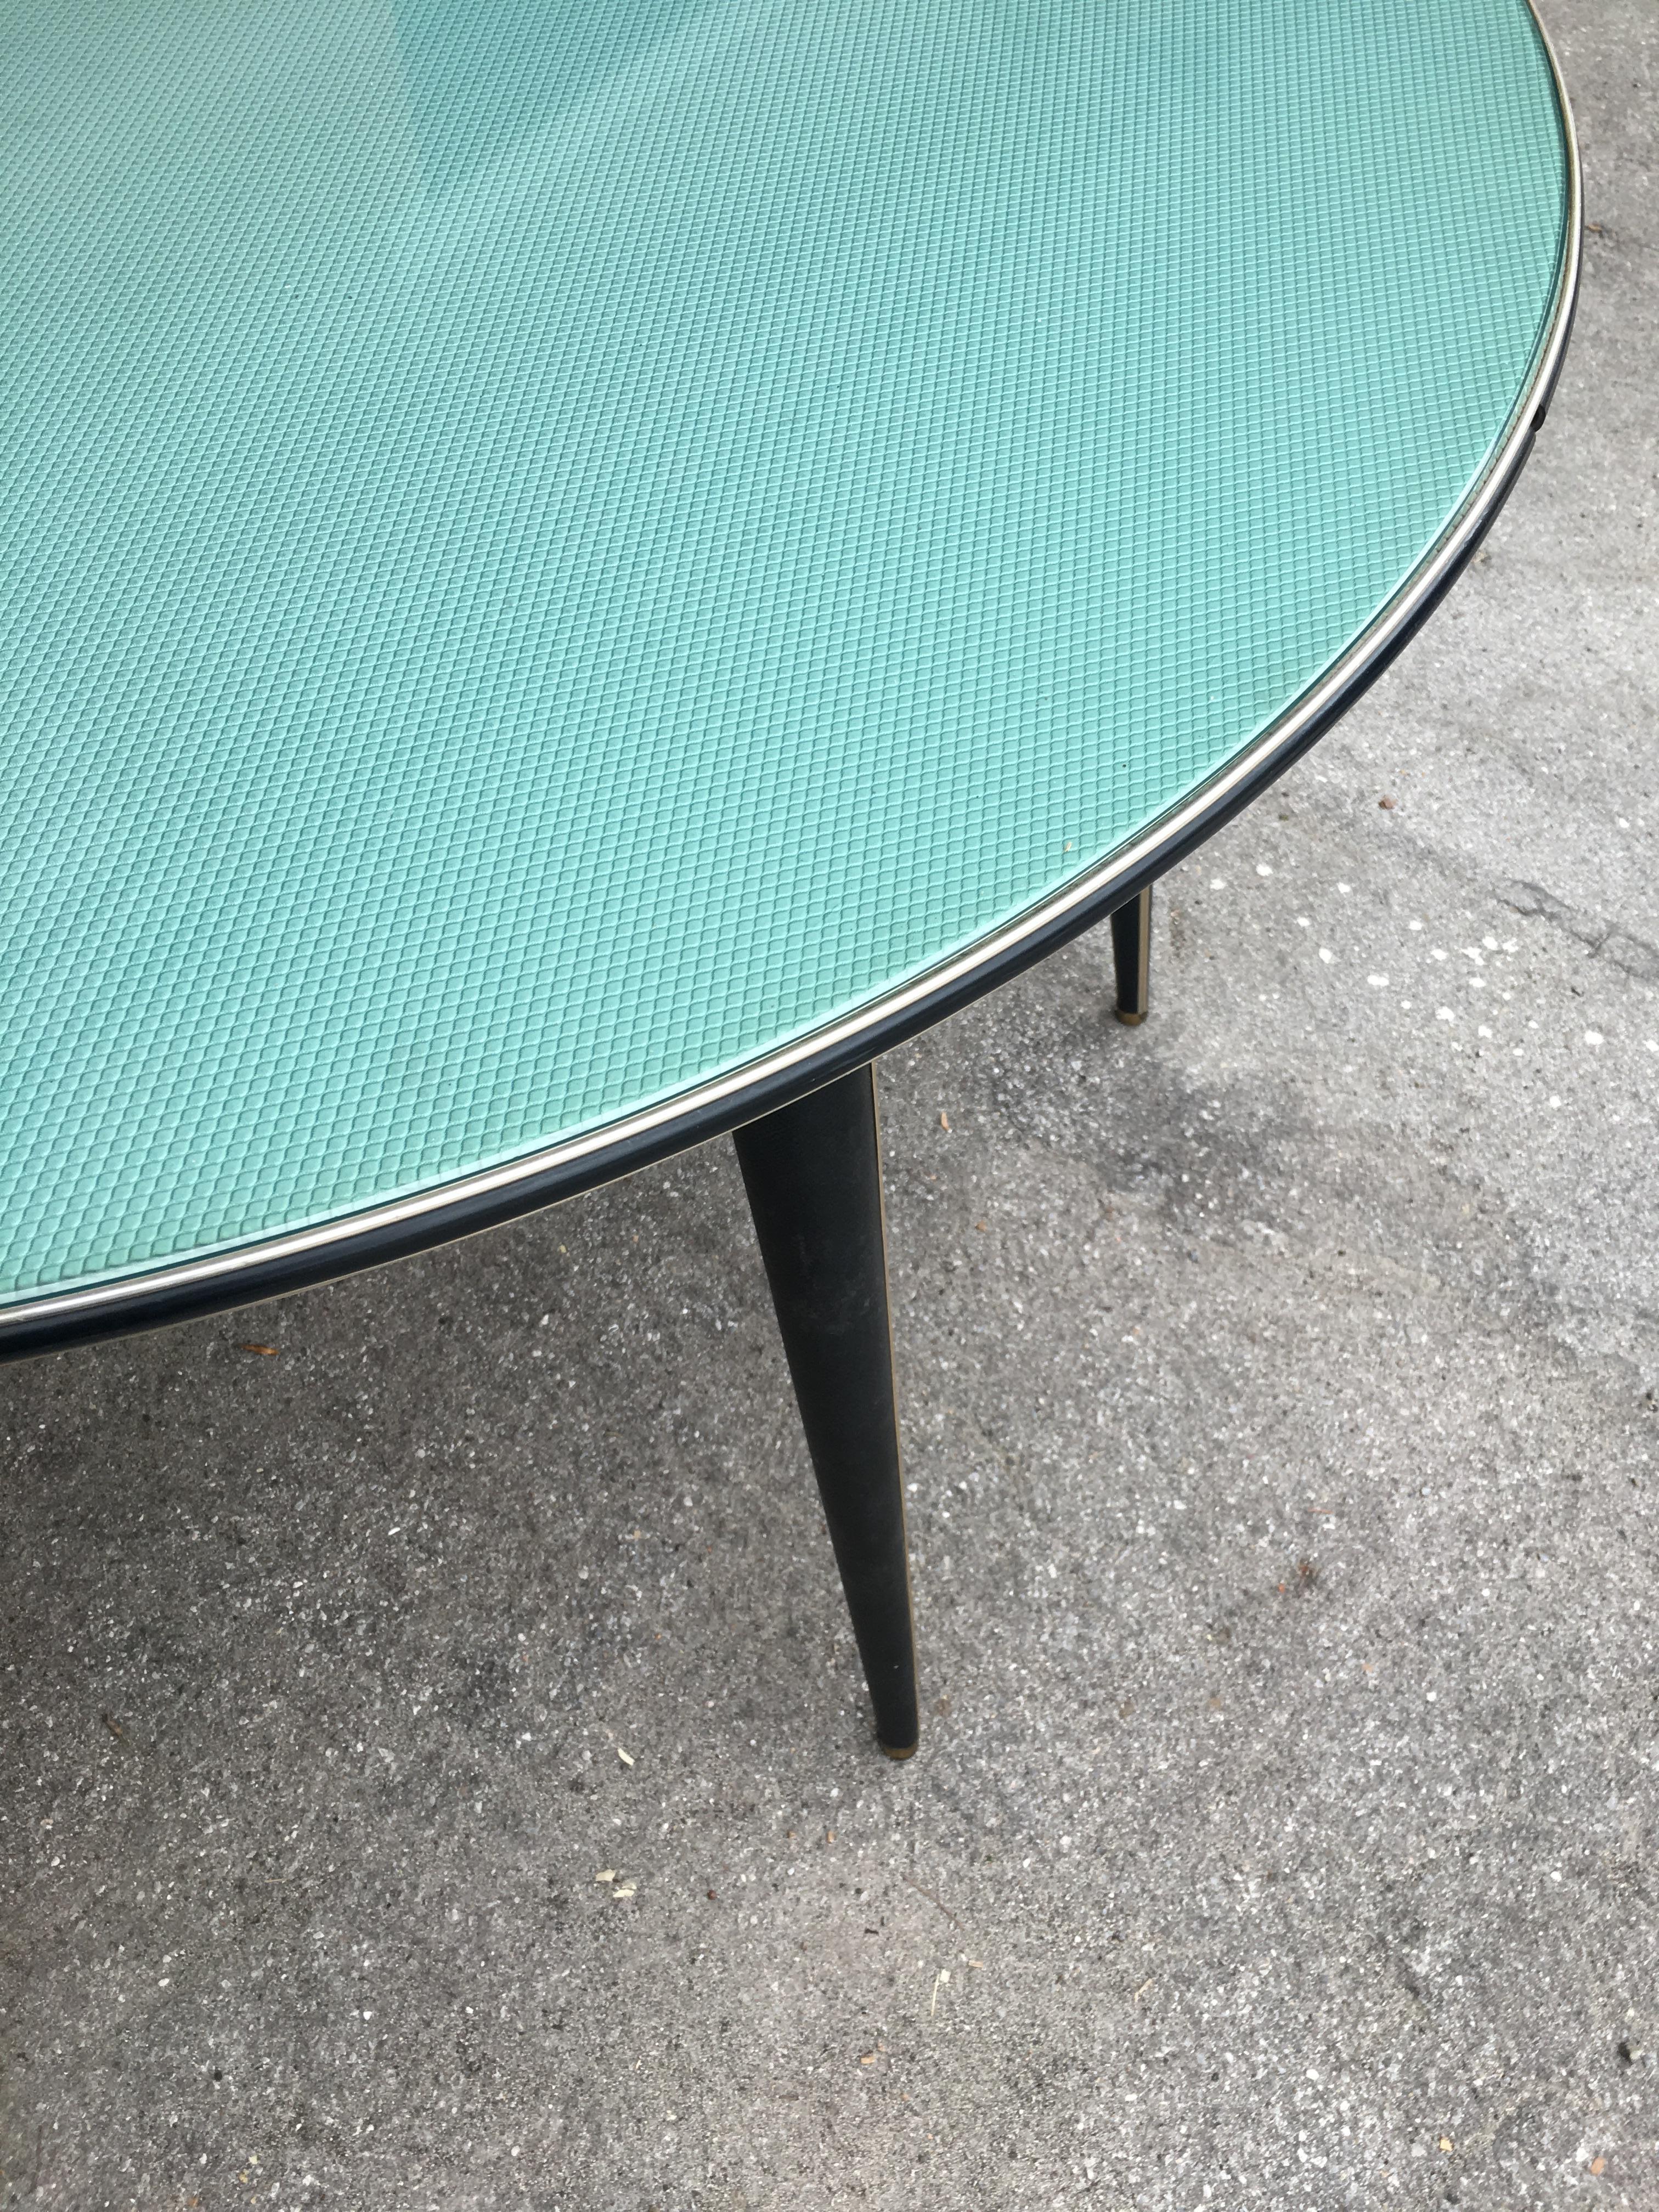 Mid-20th Century Mid-Century Modern Italian Umberto Mascagni Green and Black Round Table, 1960s For Sale